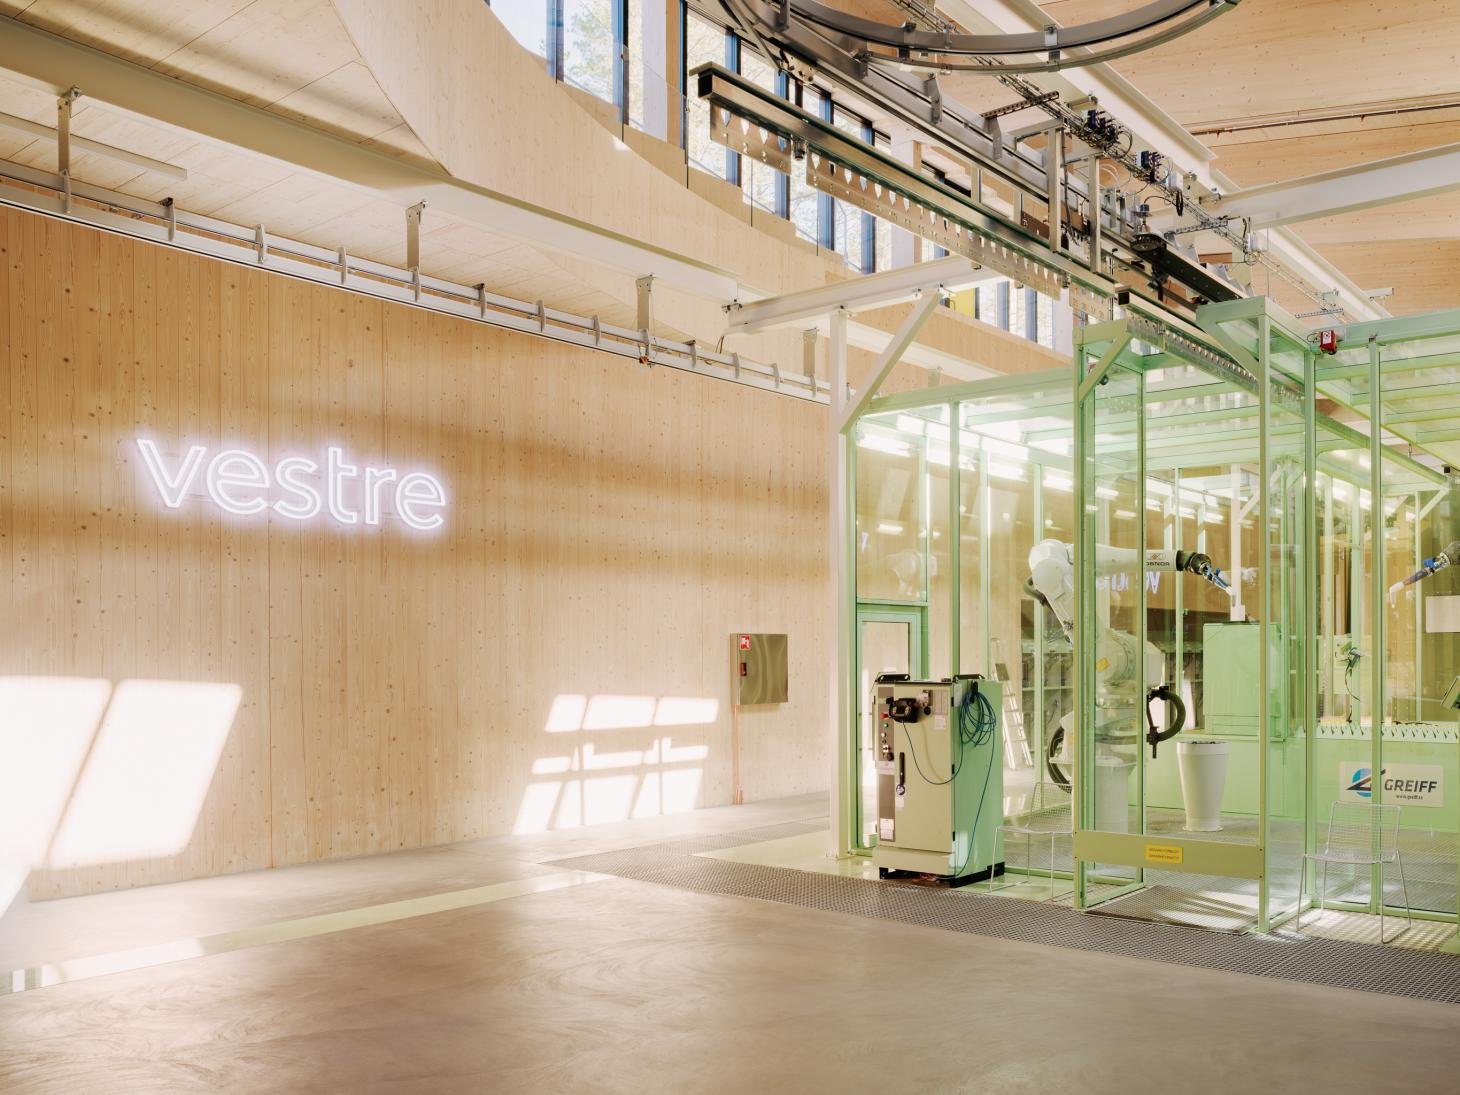 Vestre’s sustainable factory, The Plus by BIG